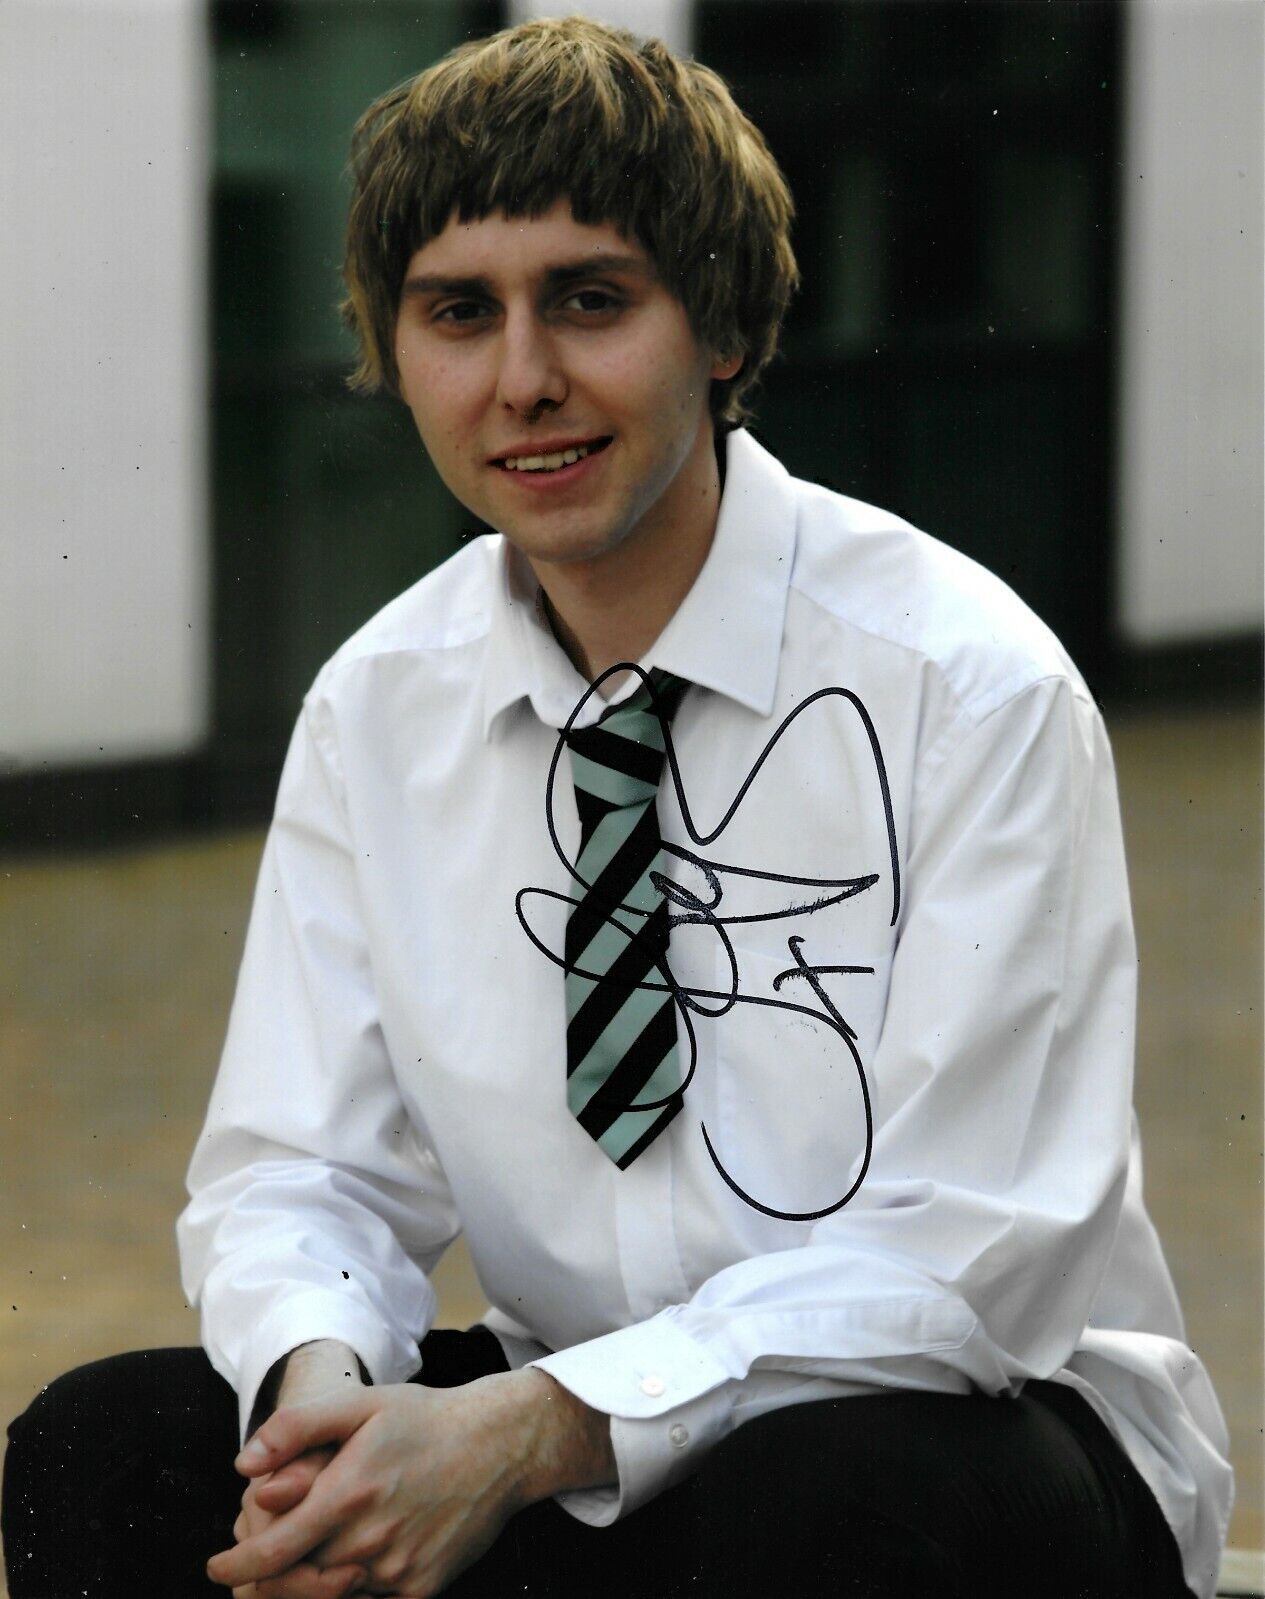 James Buckley Signed The Inbetweeners 10x8 Photo Poster painting AFTAL